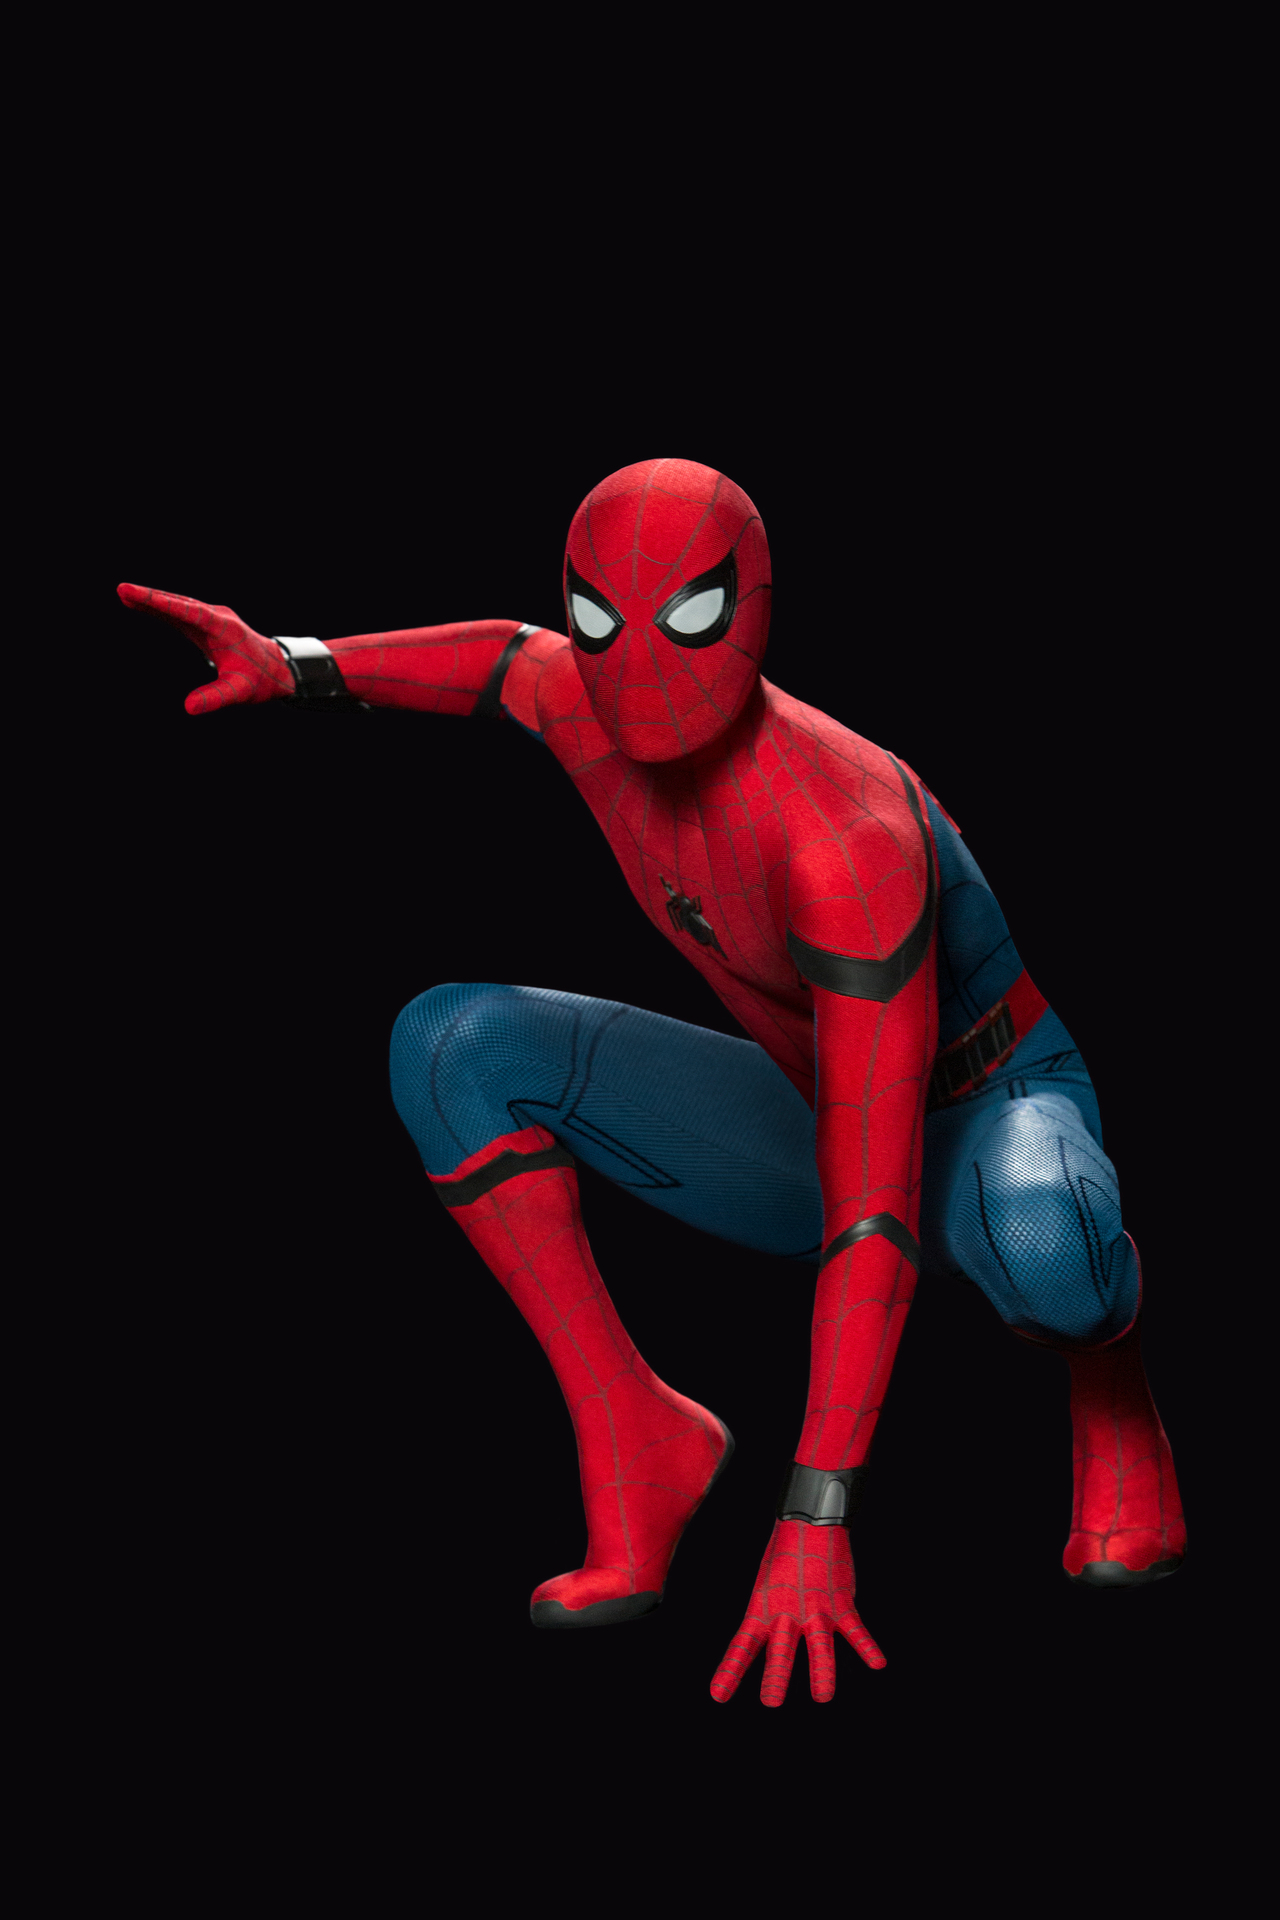 Marvel confirms Tom Holland will continue as Spider-Man in three more films  - NZ Herald